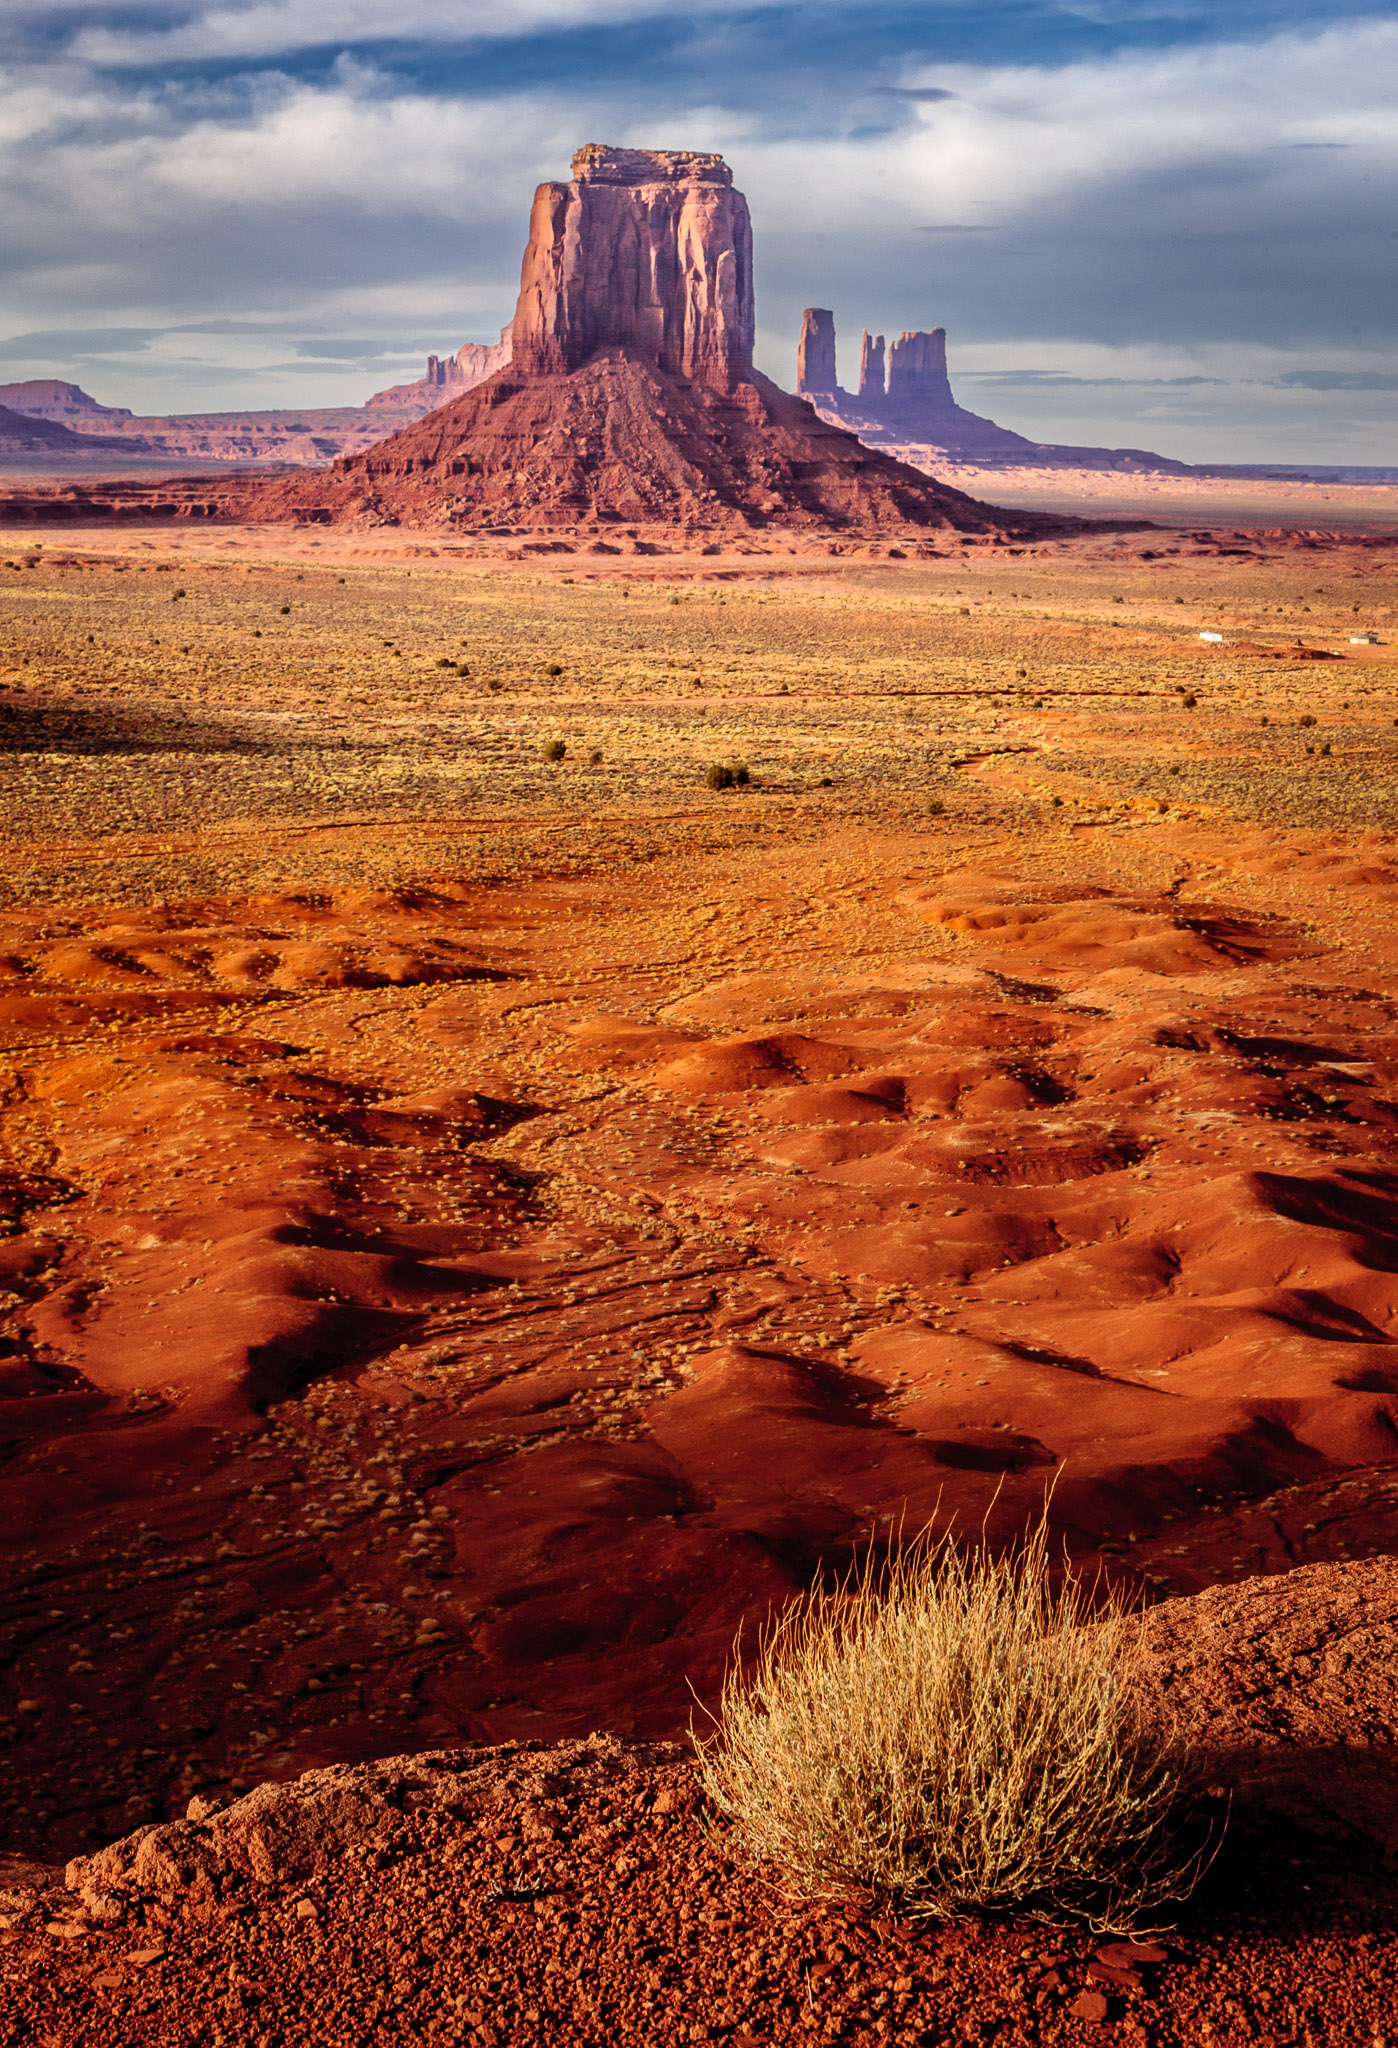 View from Artist's Point, Monument Valley